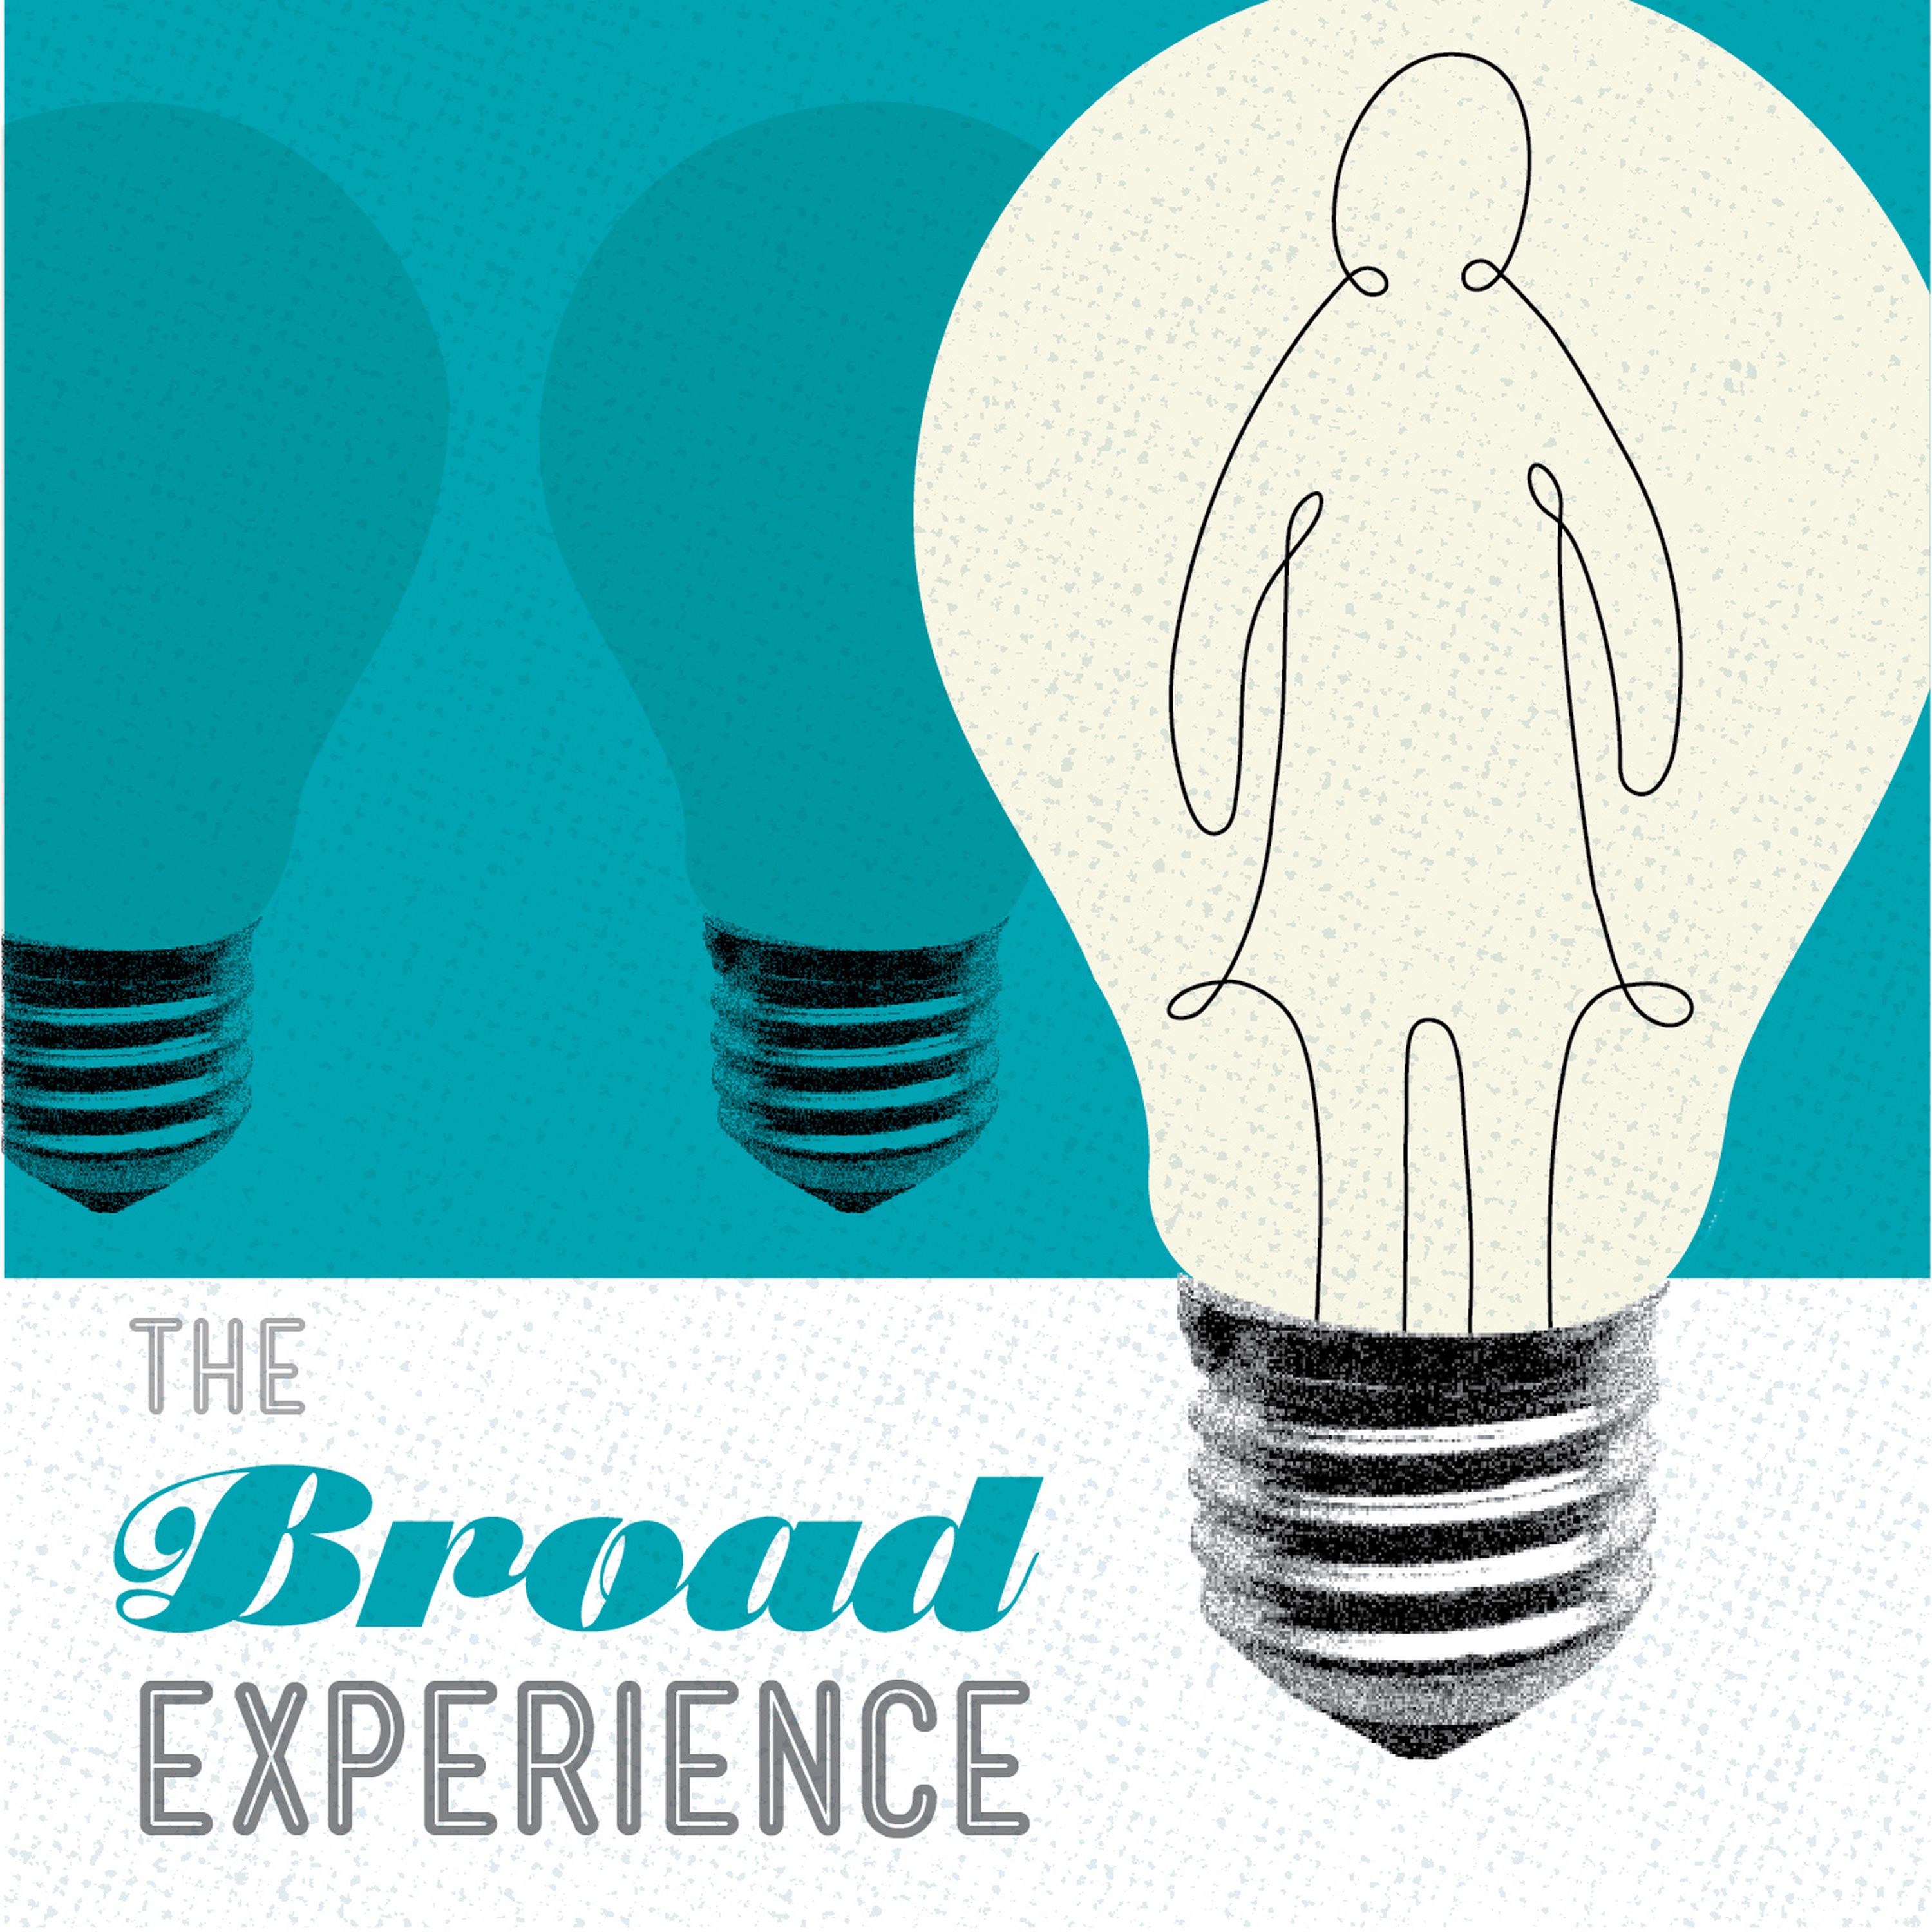 The Broad Experience 53: A technical problem